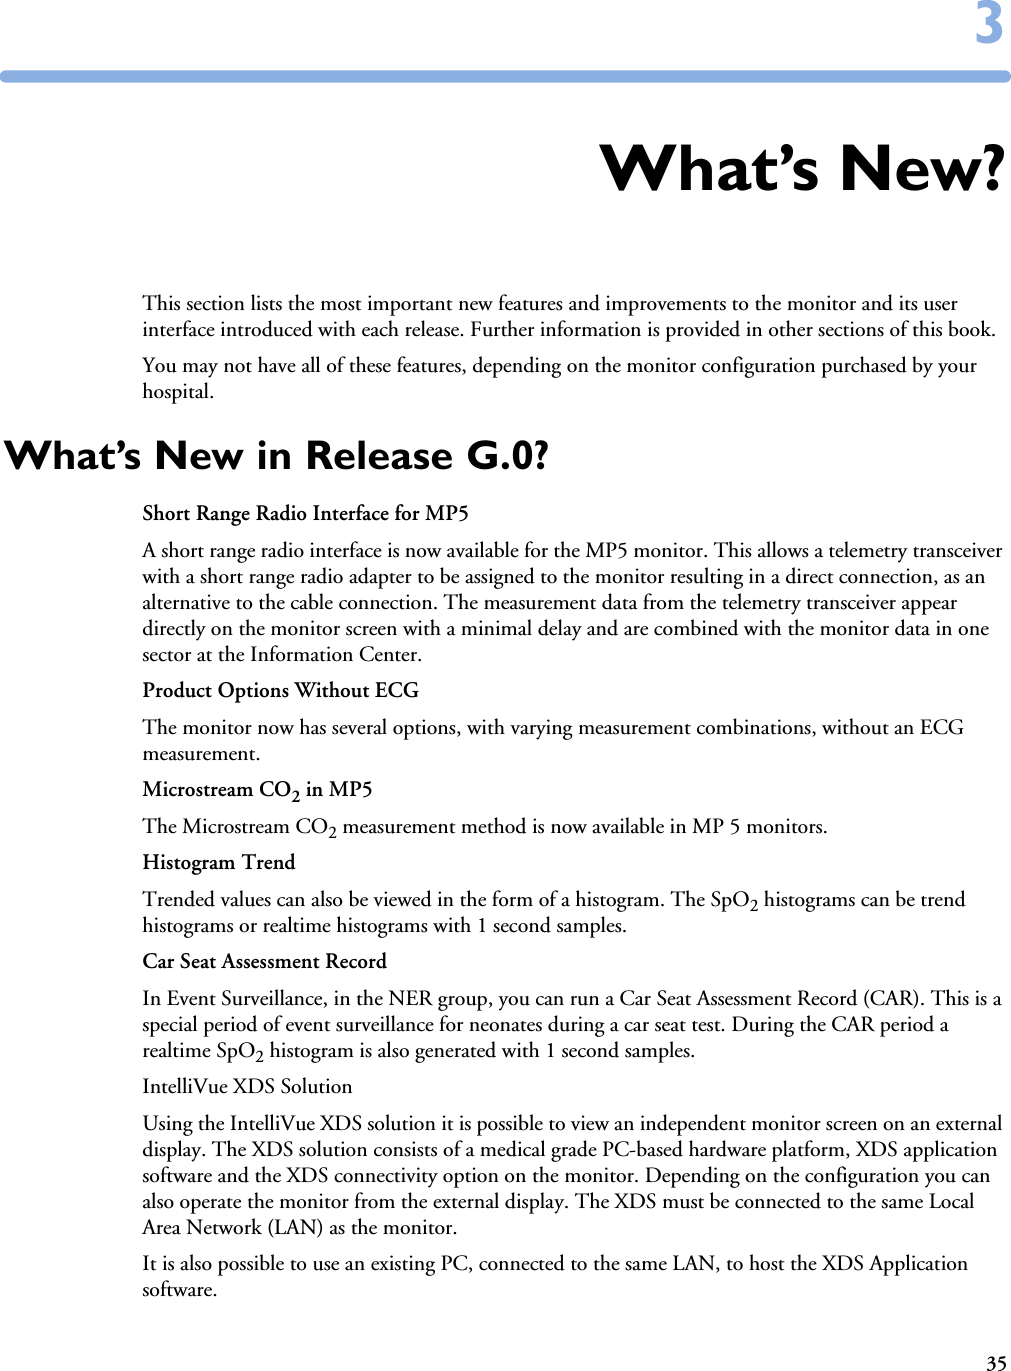 3533What’s New?This section lists the most important new features and improvements to the monitor and its user interface introduced with each release. Further information is provided in other sections of this book. You may not have all of these features, depending on the monitor configuration purchased by your hospital.What’s New in Release G.0?Short Range Radio Interface for MP5A short range radio interface is now available for the MP5 monitor. This allows a telemetry transceiver with a short range radio adapter to be assigned to the monitor resulting in a direct connection, as an alternative to the cable connection. The measurement data from the telemetry transceiver appear directly on the monitor screen with a minimal delay and are combined with the monitor data in one sector at the Information Center. Product Options Without ECGThe monitor now has several options, with varying measurement combinations, without an ECG measurement. Microstream CO2 in MP5The Microstream CO2 measurement method is now available in MP 5 monitors. Histogram TrendTrended values can also be viewed in the form of a histogram. The SpO2 histograms can be trend histograms or realtime histograms with 1 second samples. Car Seat Assessment RecordIn Event Surveillance, in the NER group, you can run a Car Seat Assessment Record (CAR). This is a special period of event surveillance for neonates during a car seat test. During the CAR period a realtime SpO2 histogram is also generated with 1 second samples.IntelliVue XDS SolutionUsing the IntelliVue XDS solution it is possible to view an independent monitor screen on an external display. The XDS solution consists of a medical grade PC-based hardware platform, XDS application software and the XDS connectivity option on the monitor. Depending on the configuration you can also operate the monitor from the external display. The XDS must be connected to the same Local Area Network (LAN) as the monitor. It is also possible to use an existing PC, connected to the same LAN, to host the XDS Application software.